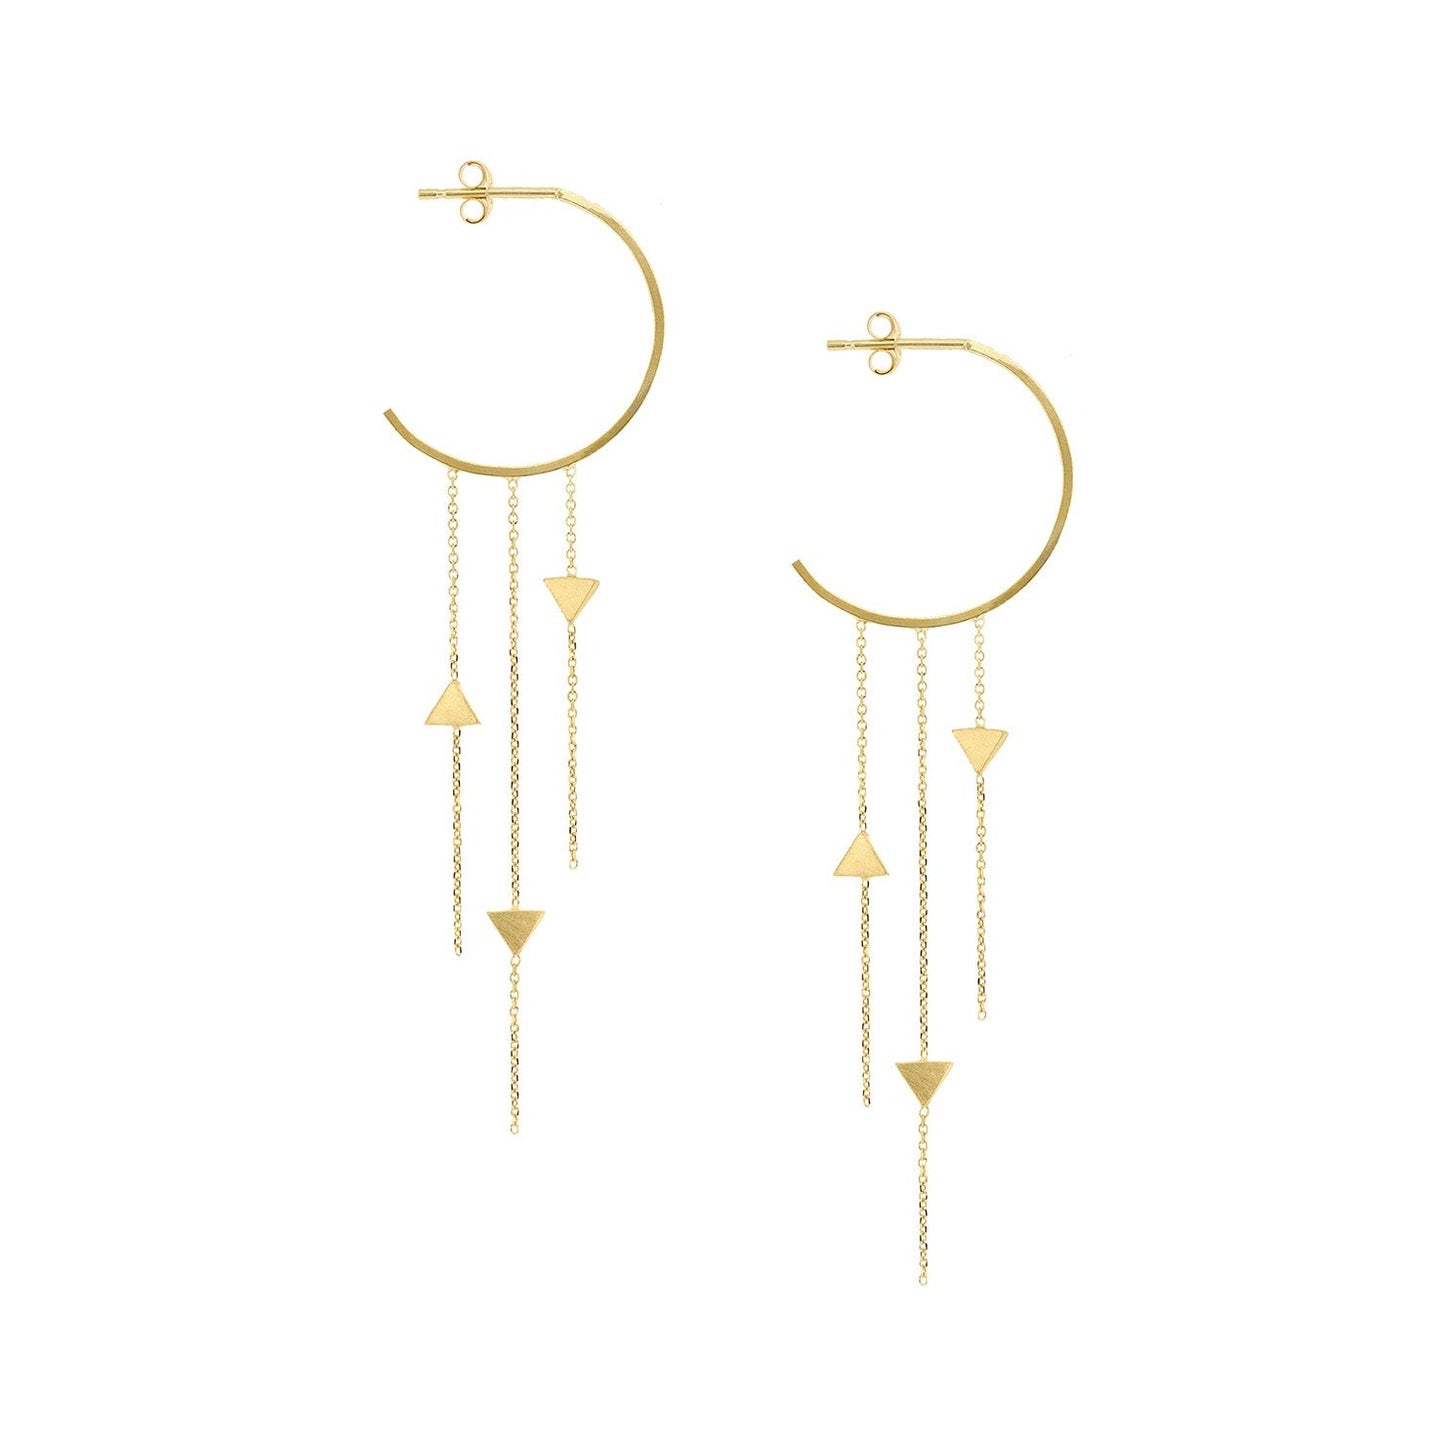 18ct yellow gold small hoop earrings with 3 hanging fine chains inserted with 3 brushed arrow elements